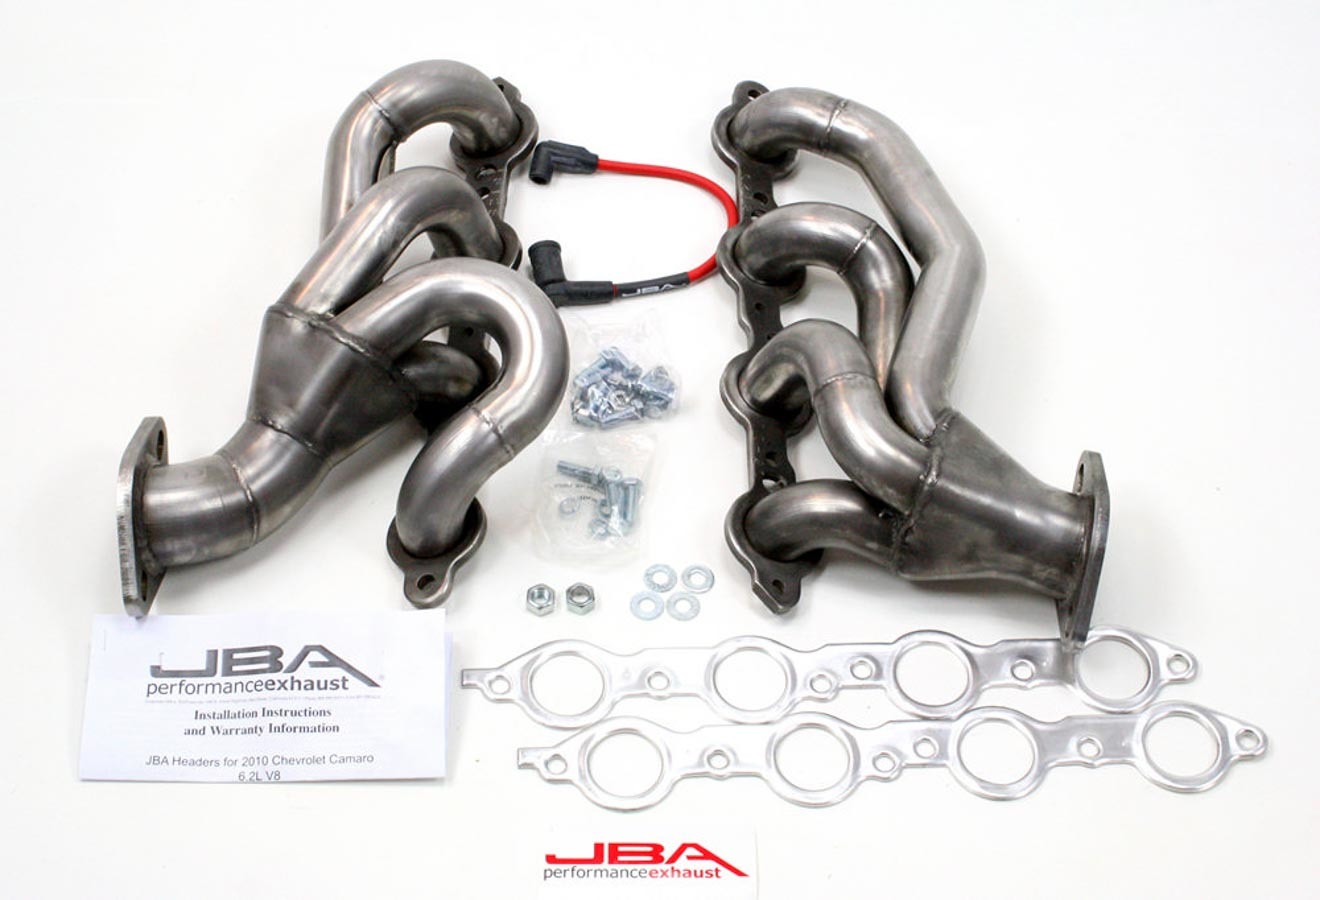 JBA Exhaust 1812S Headers, Cat4ward, 1-3/4 in Primary, 3 in Collector, Stainless, Natural, GM LS-Series, Chevy Camaro 2011-14, Pair